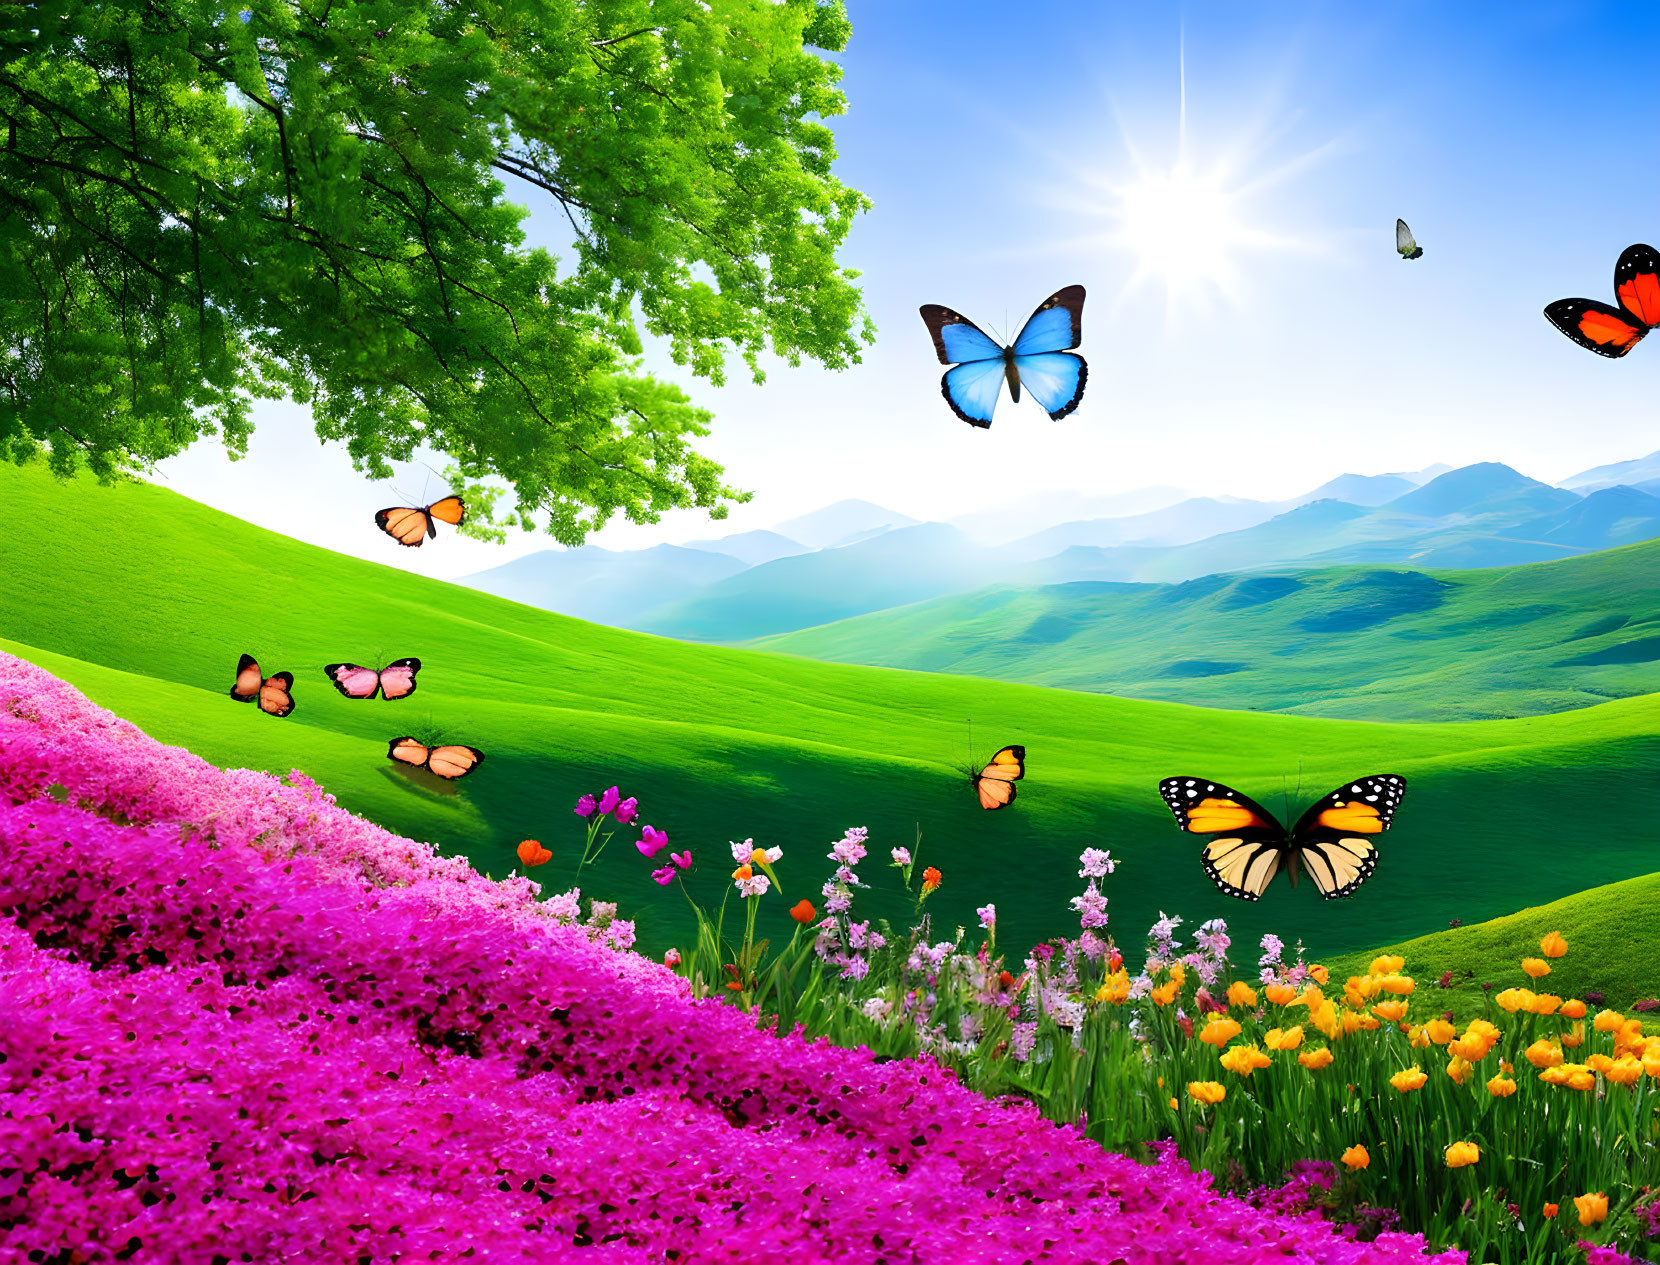 Lush Green Hills and Colorful Flowers in Vibrant Spring Landscape